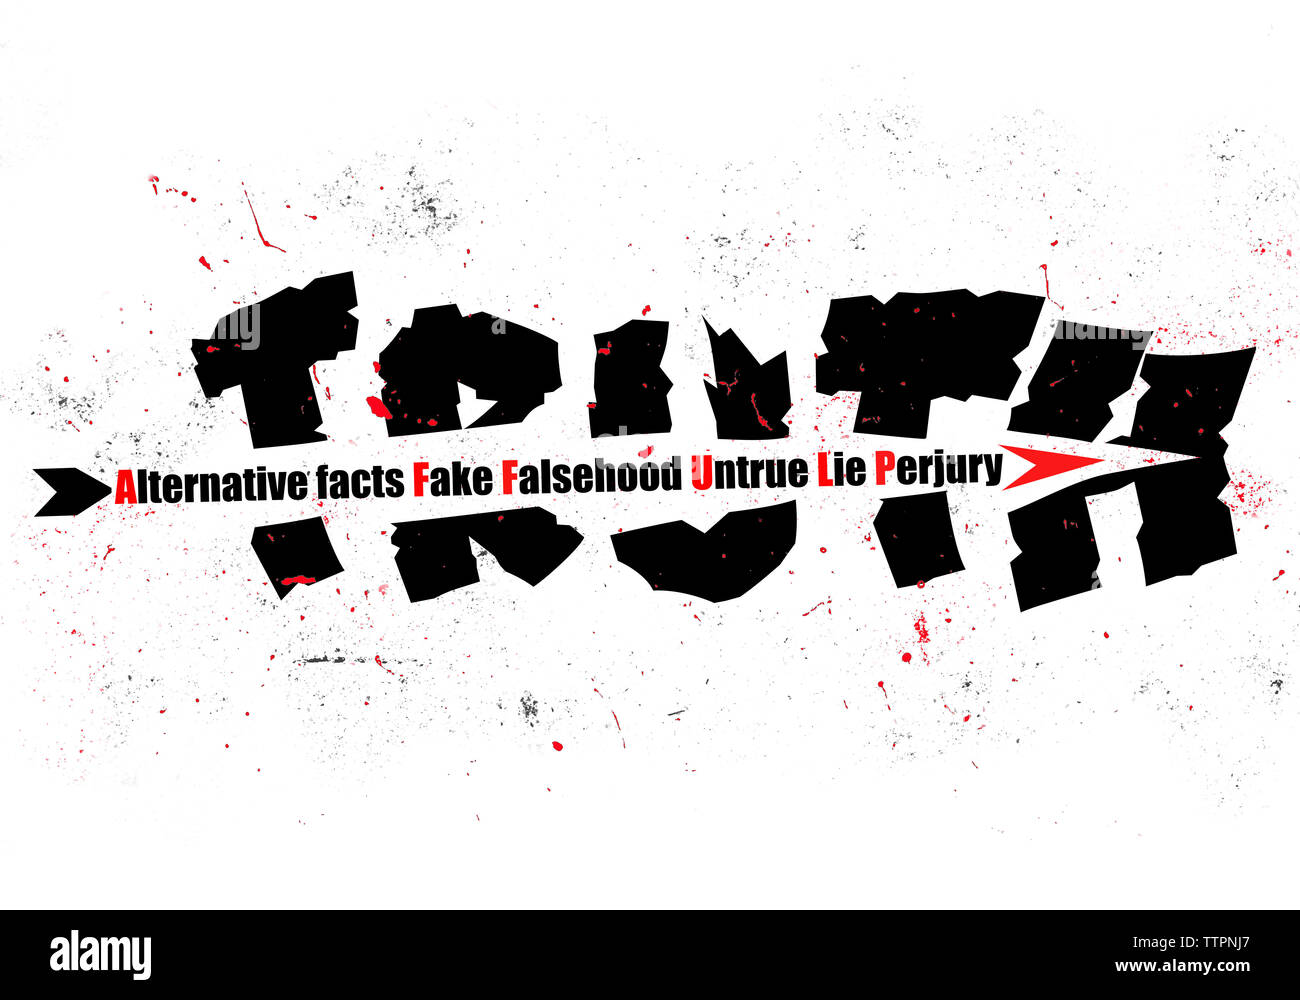 Concept illustration an arrow of Alternative facts, Fake, Falsehood, untrue, lie and perjury shattering Truth text paint splattered background Stock Photo